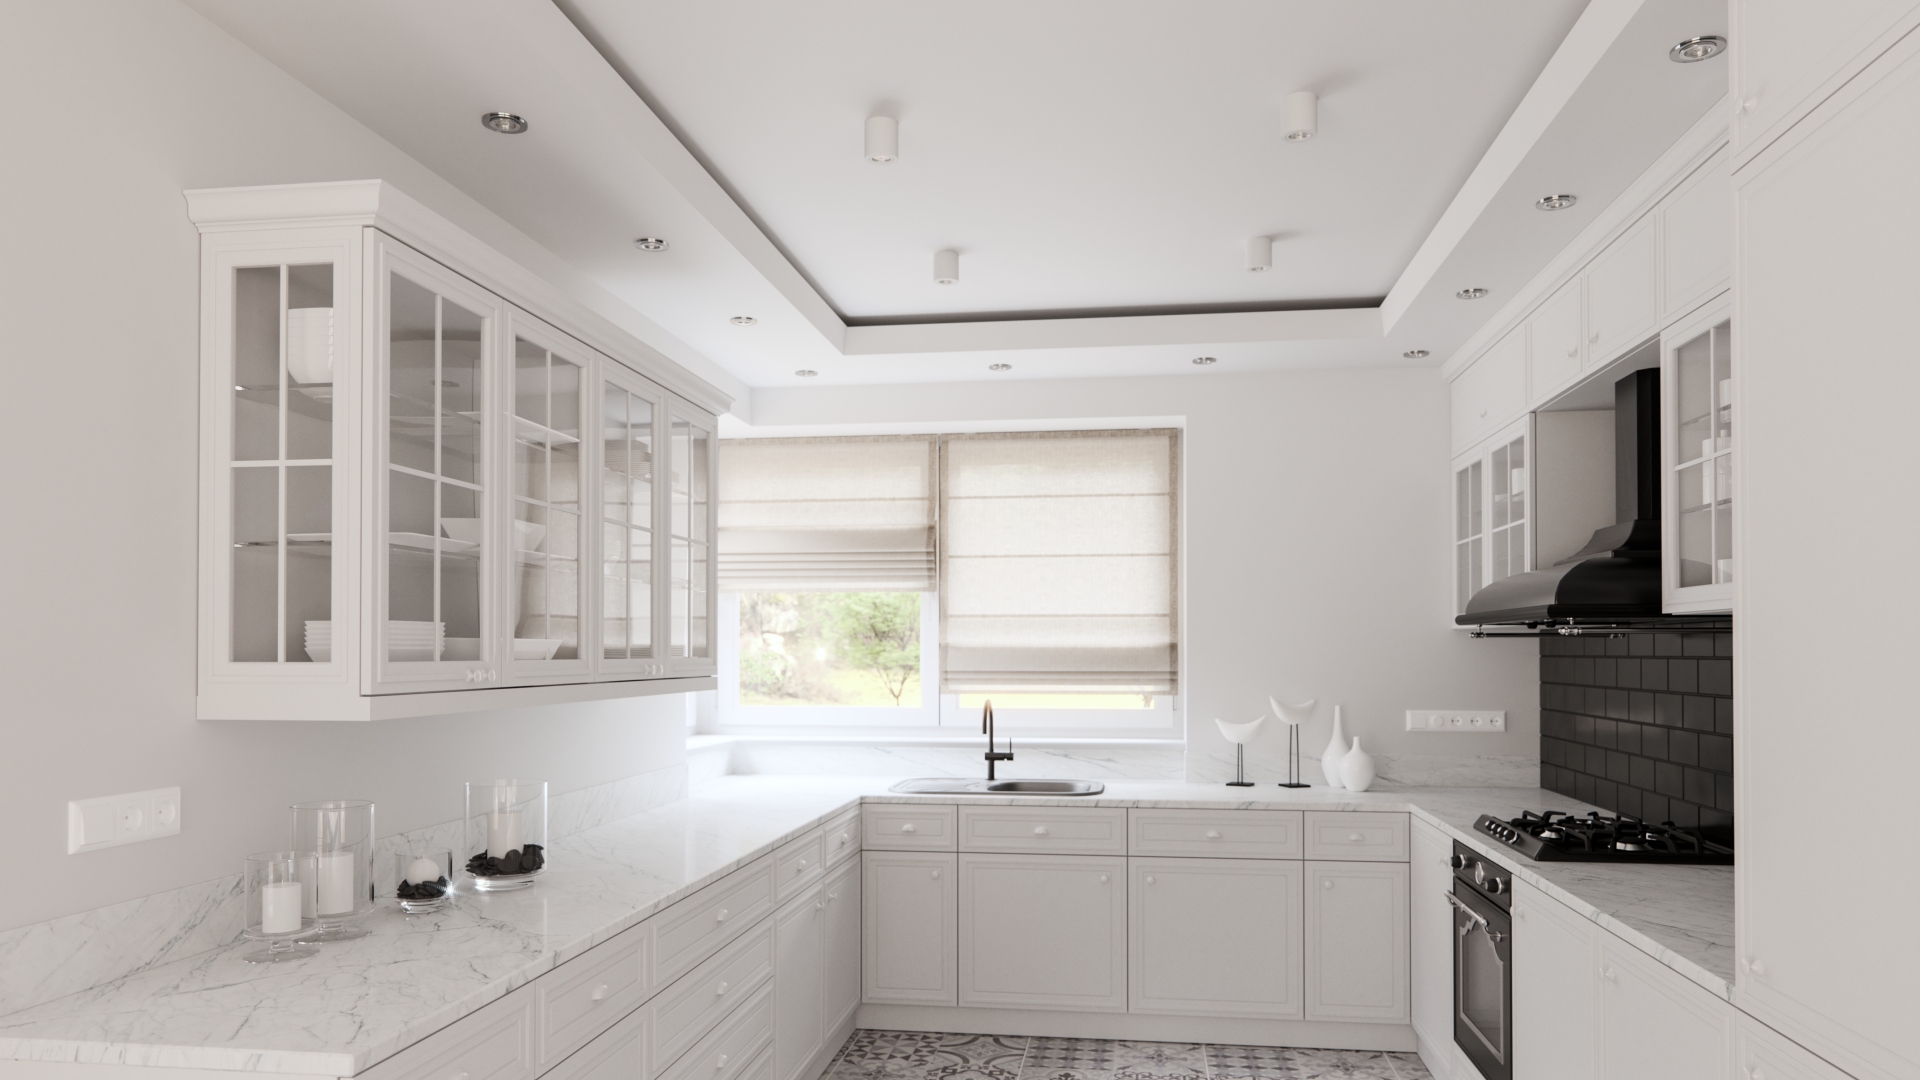 Recessed ceiling eyelets in the kitchen